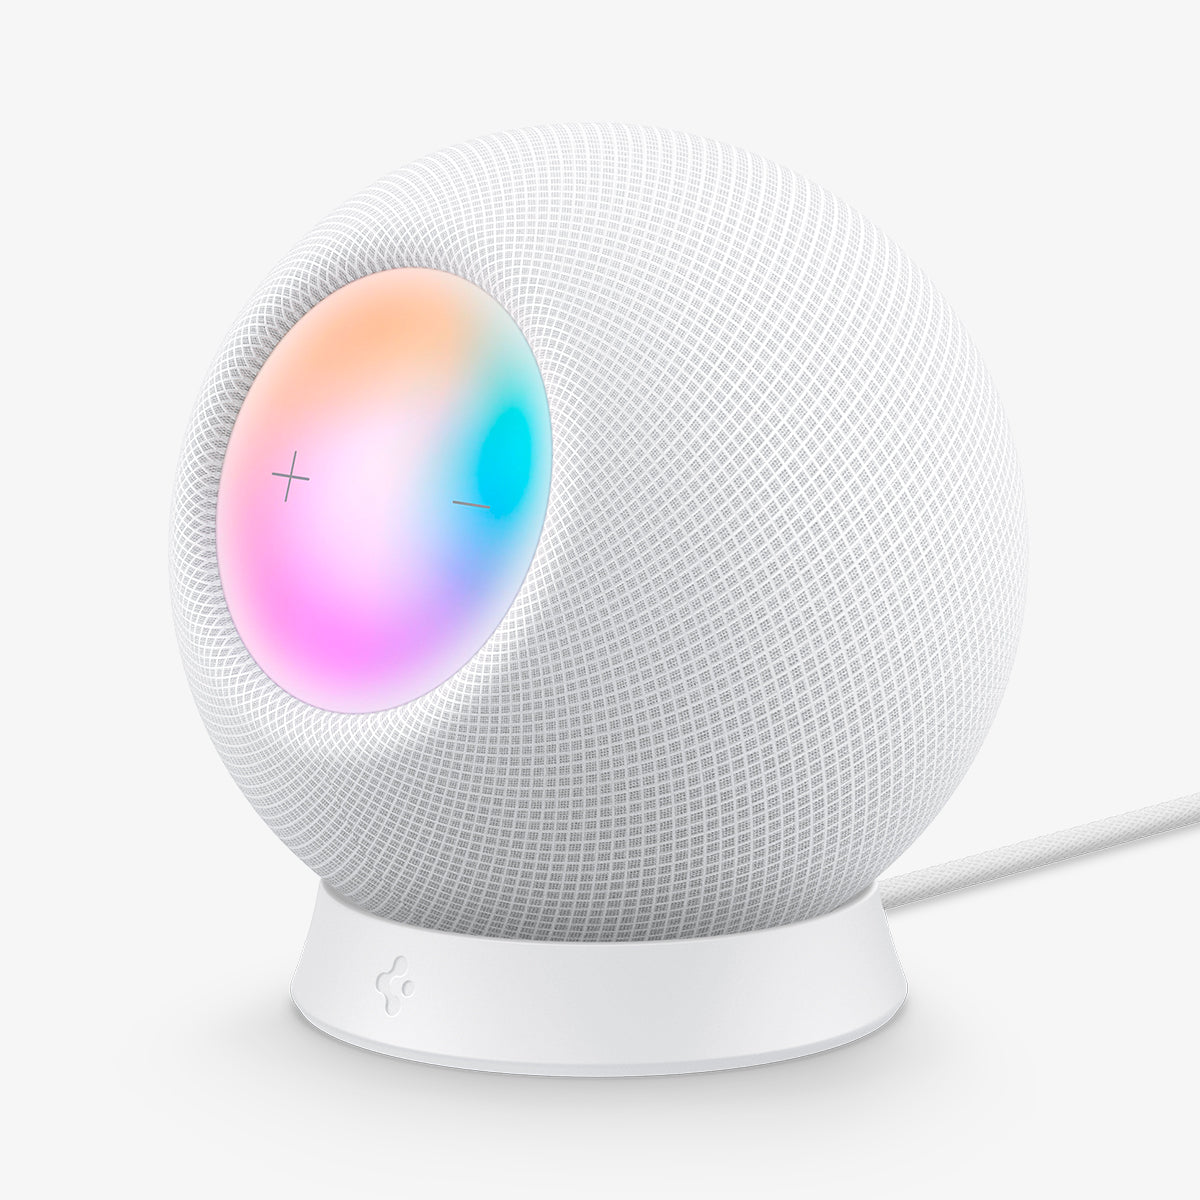 AMP02816 - Apple HomePod Mini Stand Silicone Fit in white showing the front and side with homepod on top